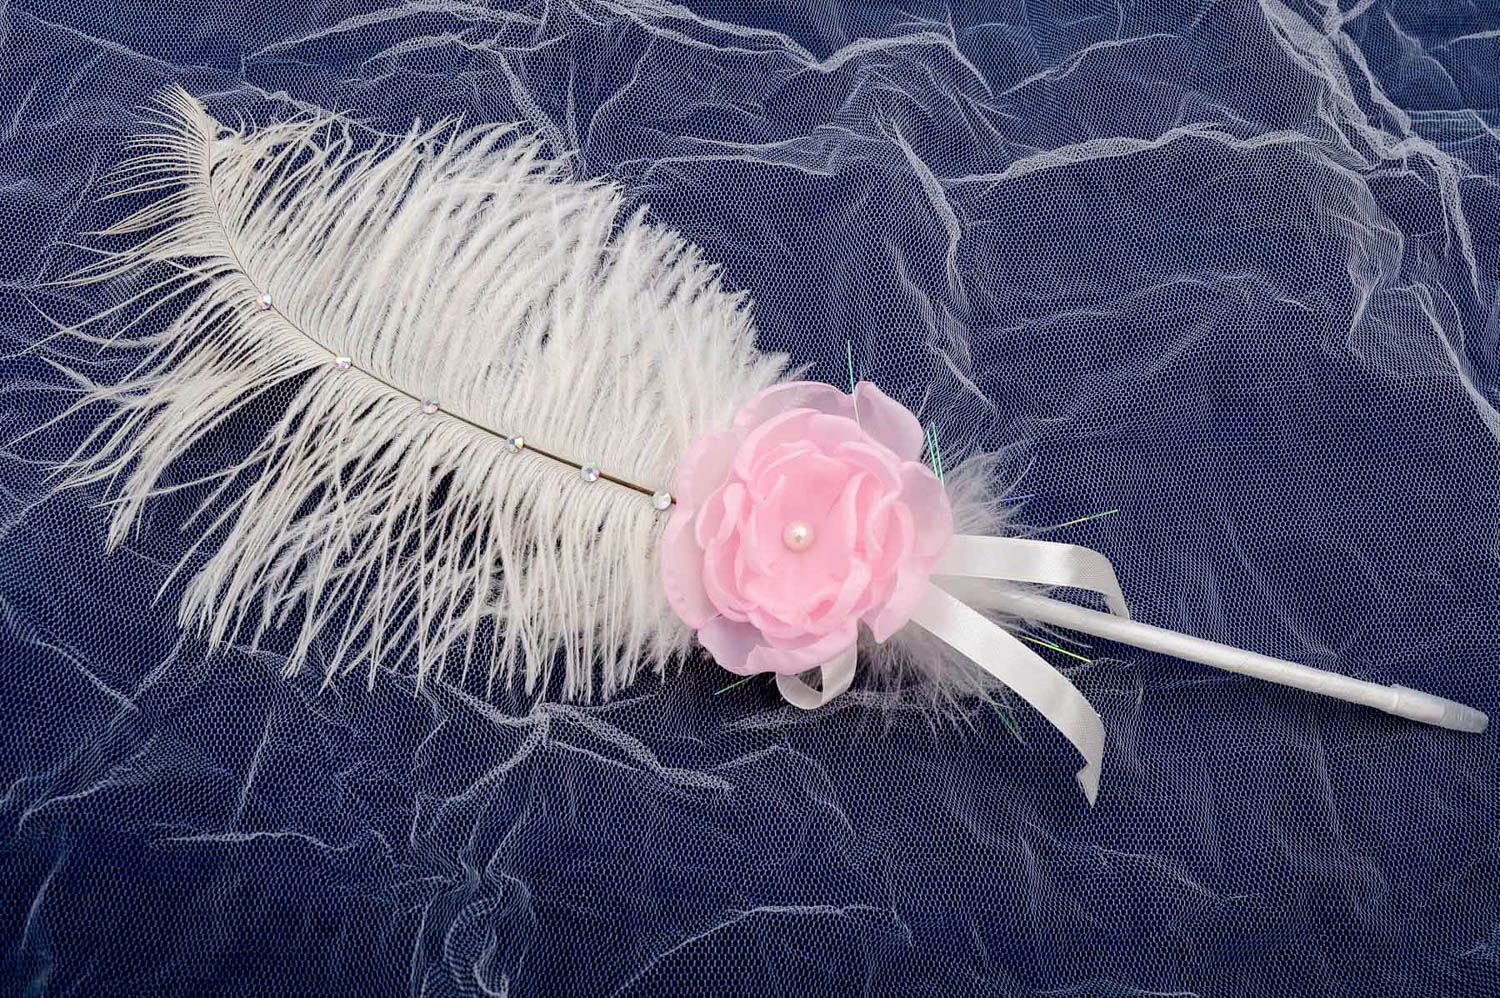 Handmade pen designer pen with feathers for wedding bridal accessories photo 1